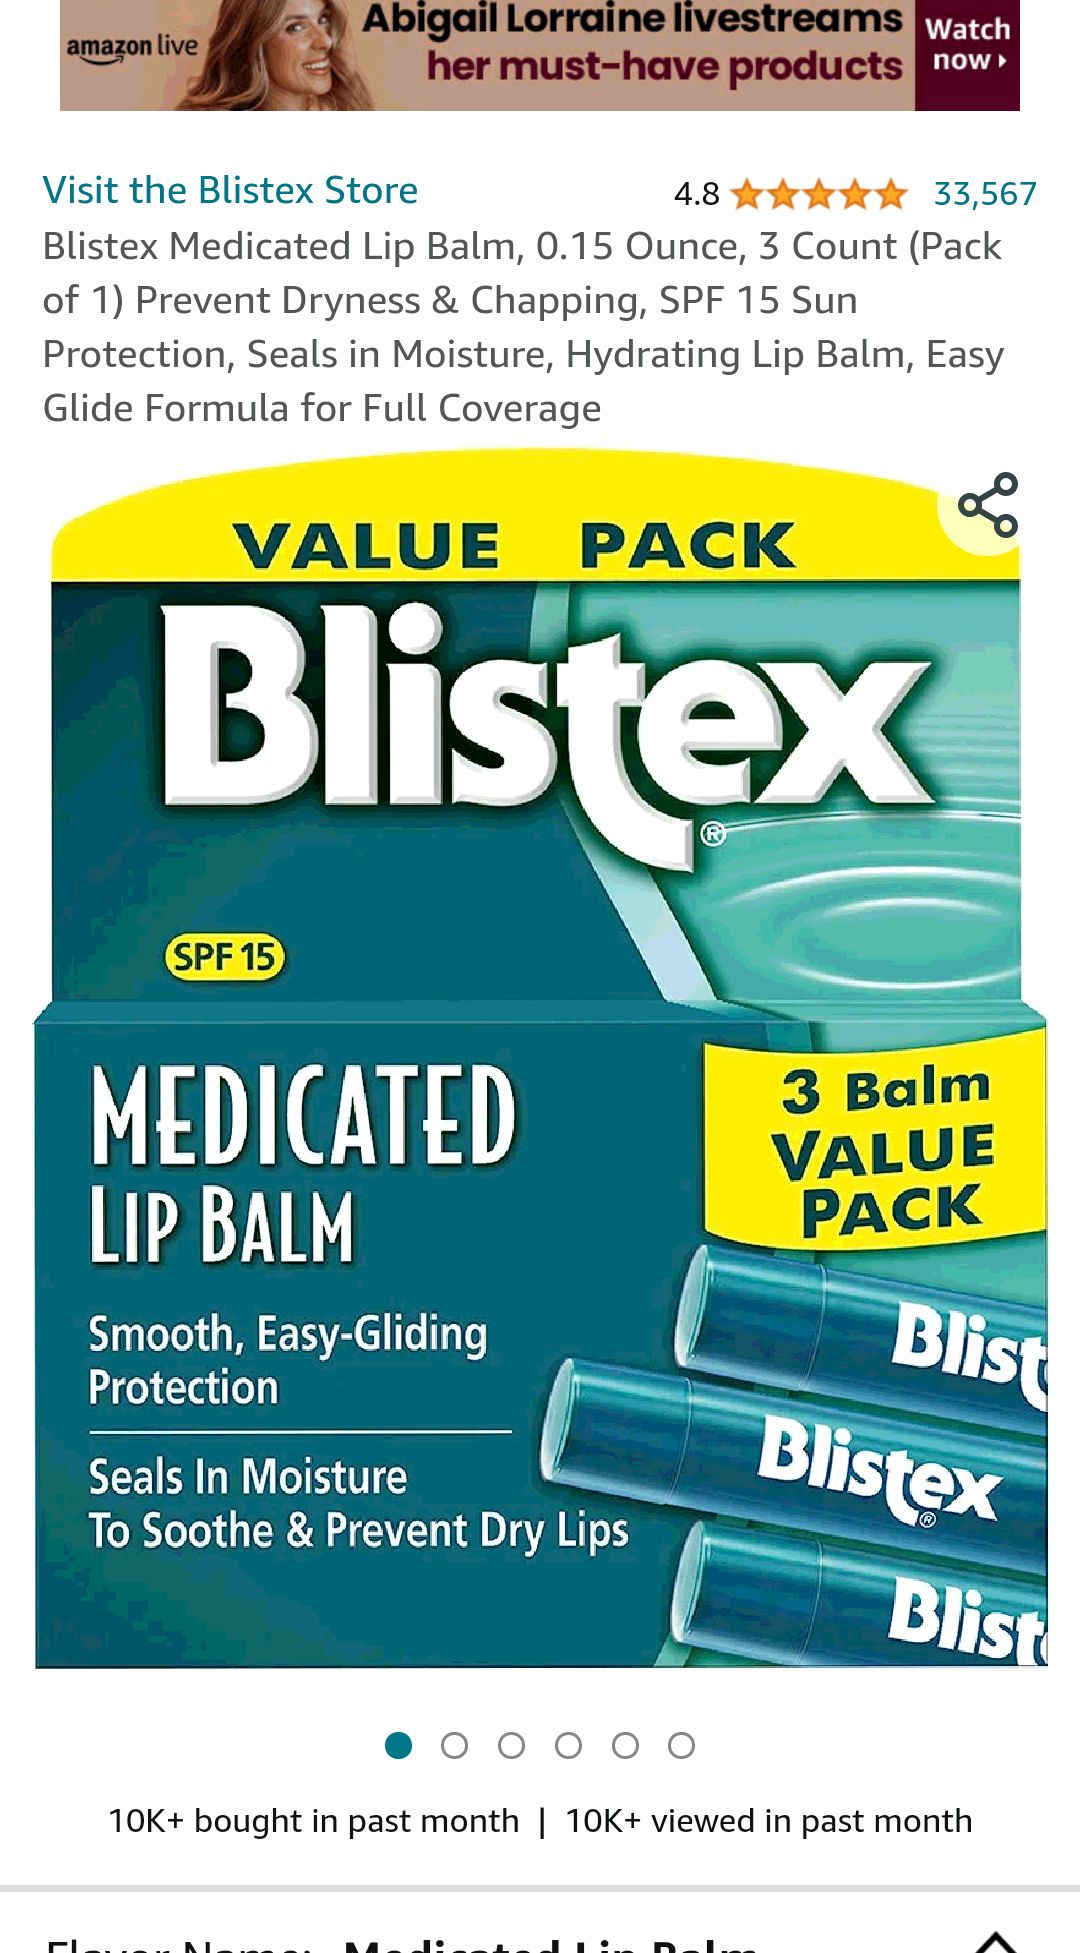 Blistex Medicated Lip Balm, 0.15 Ounce, 3 Count (Pack of 1) Prevent Dryness & Chapping, SPF 15 Sun Protection, Seals in Moisture, Hydrating Lip Balm, Easy Glide Formula for Full Coverage : Health & Ho